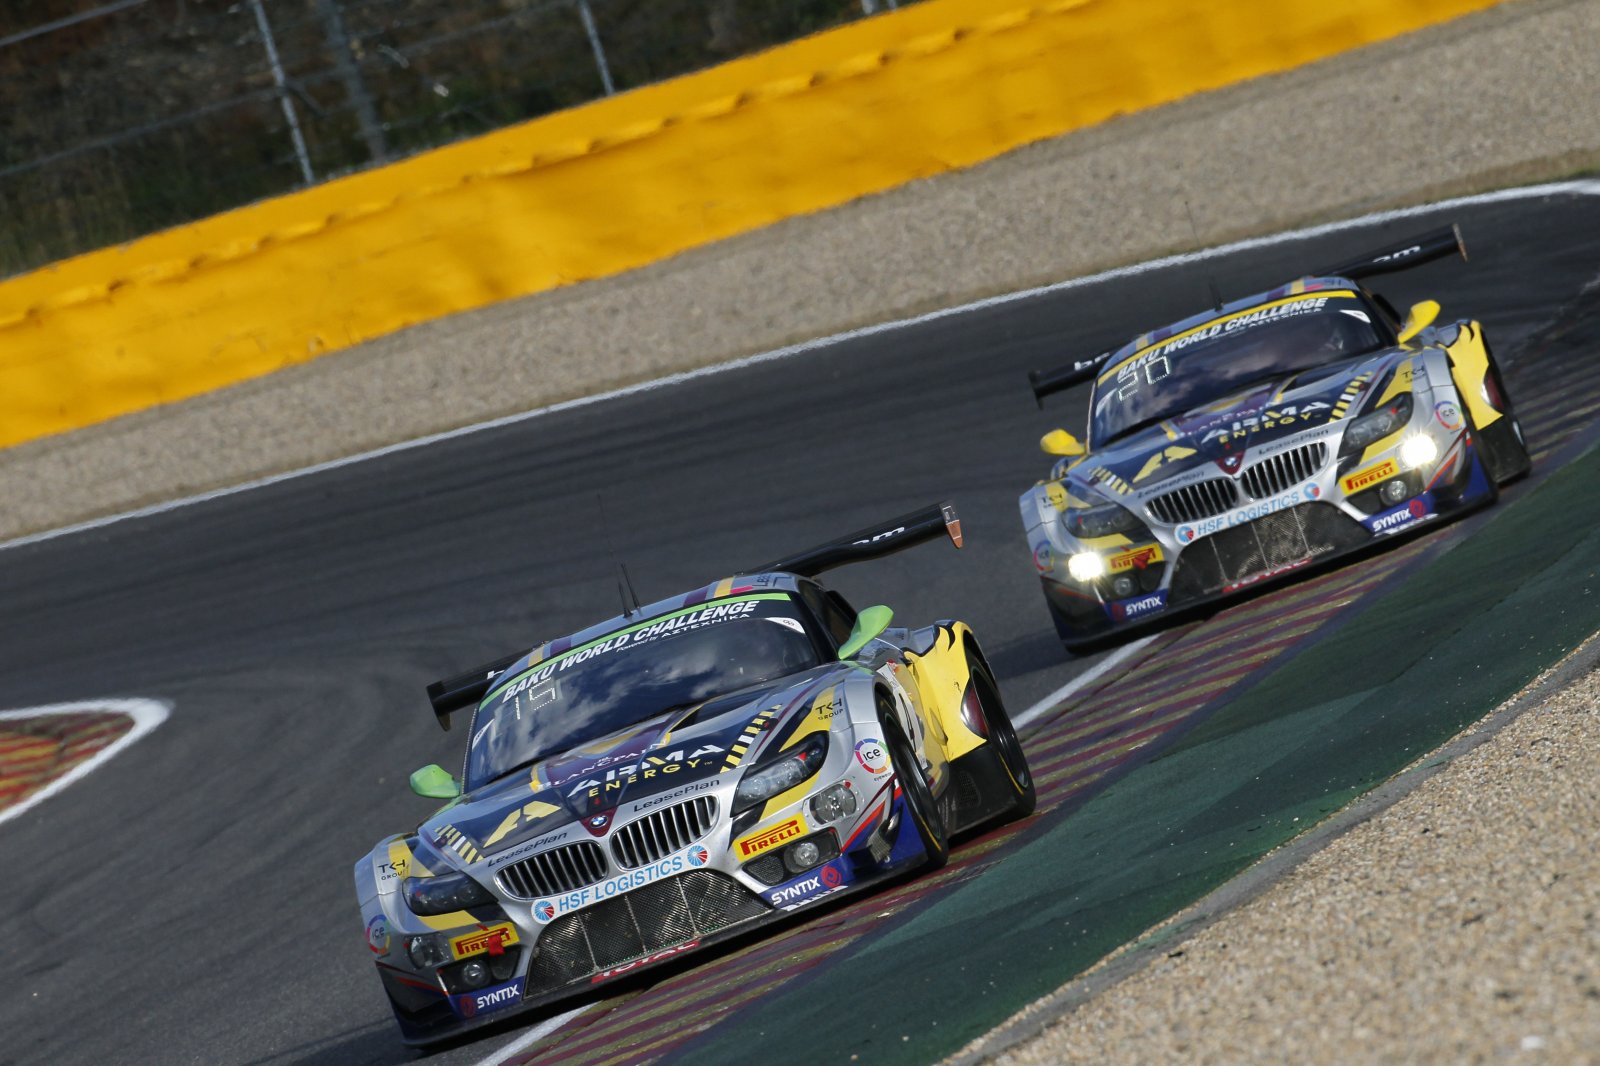 BMW Sports Trophy Team Marc VDS confirms entry for the Total 24 Hours of Spa